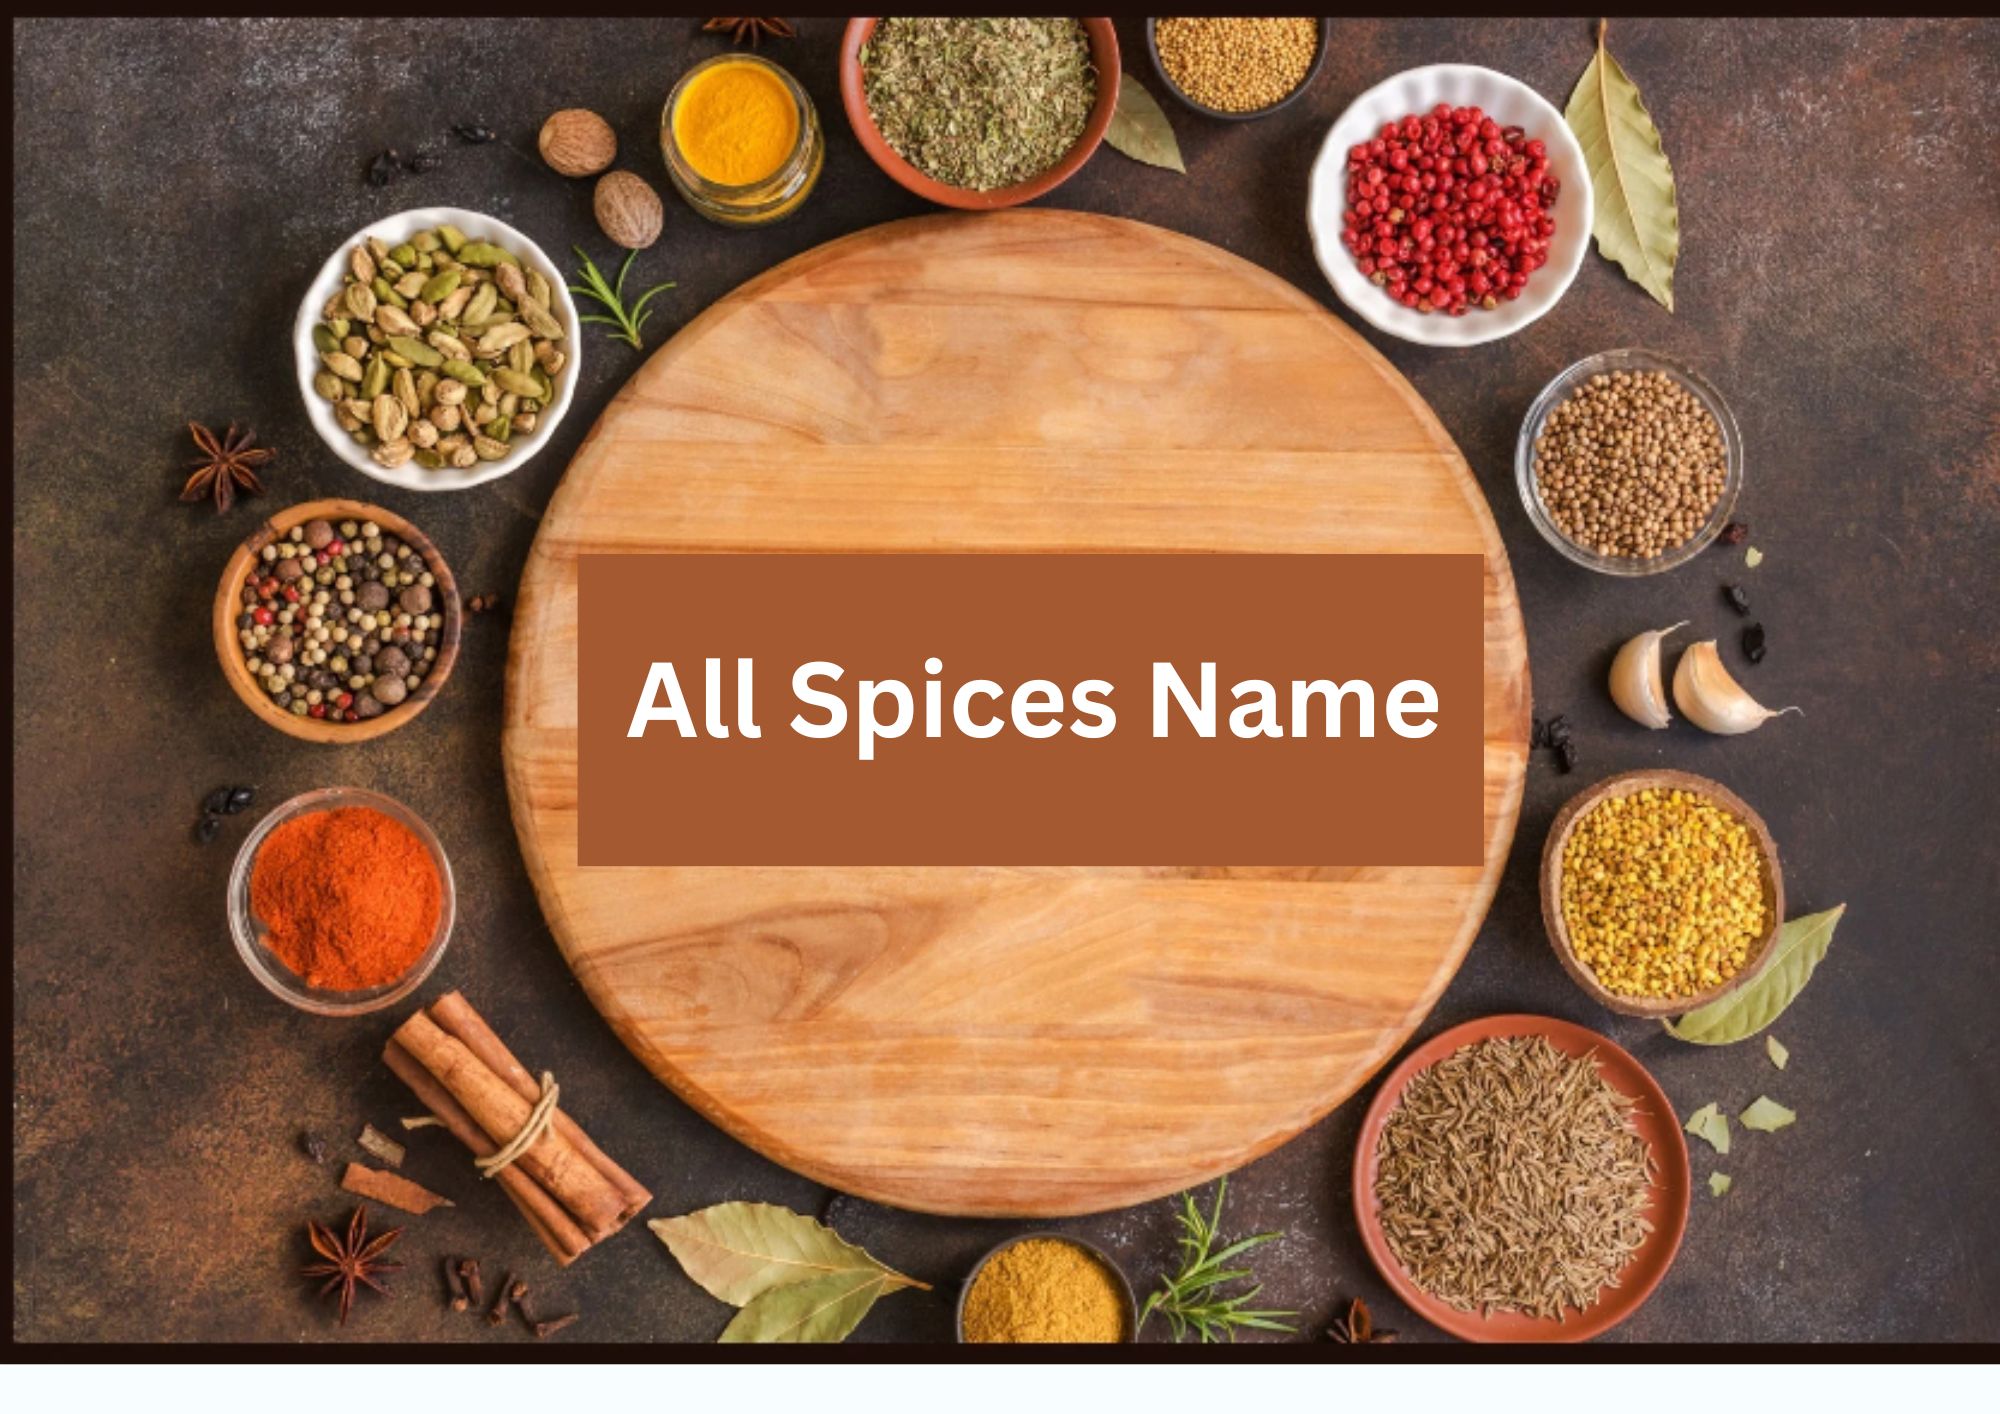 Top 50 Spices Name List In Hindi and English – मसालों के नाम